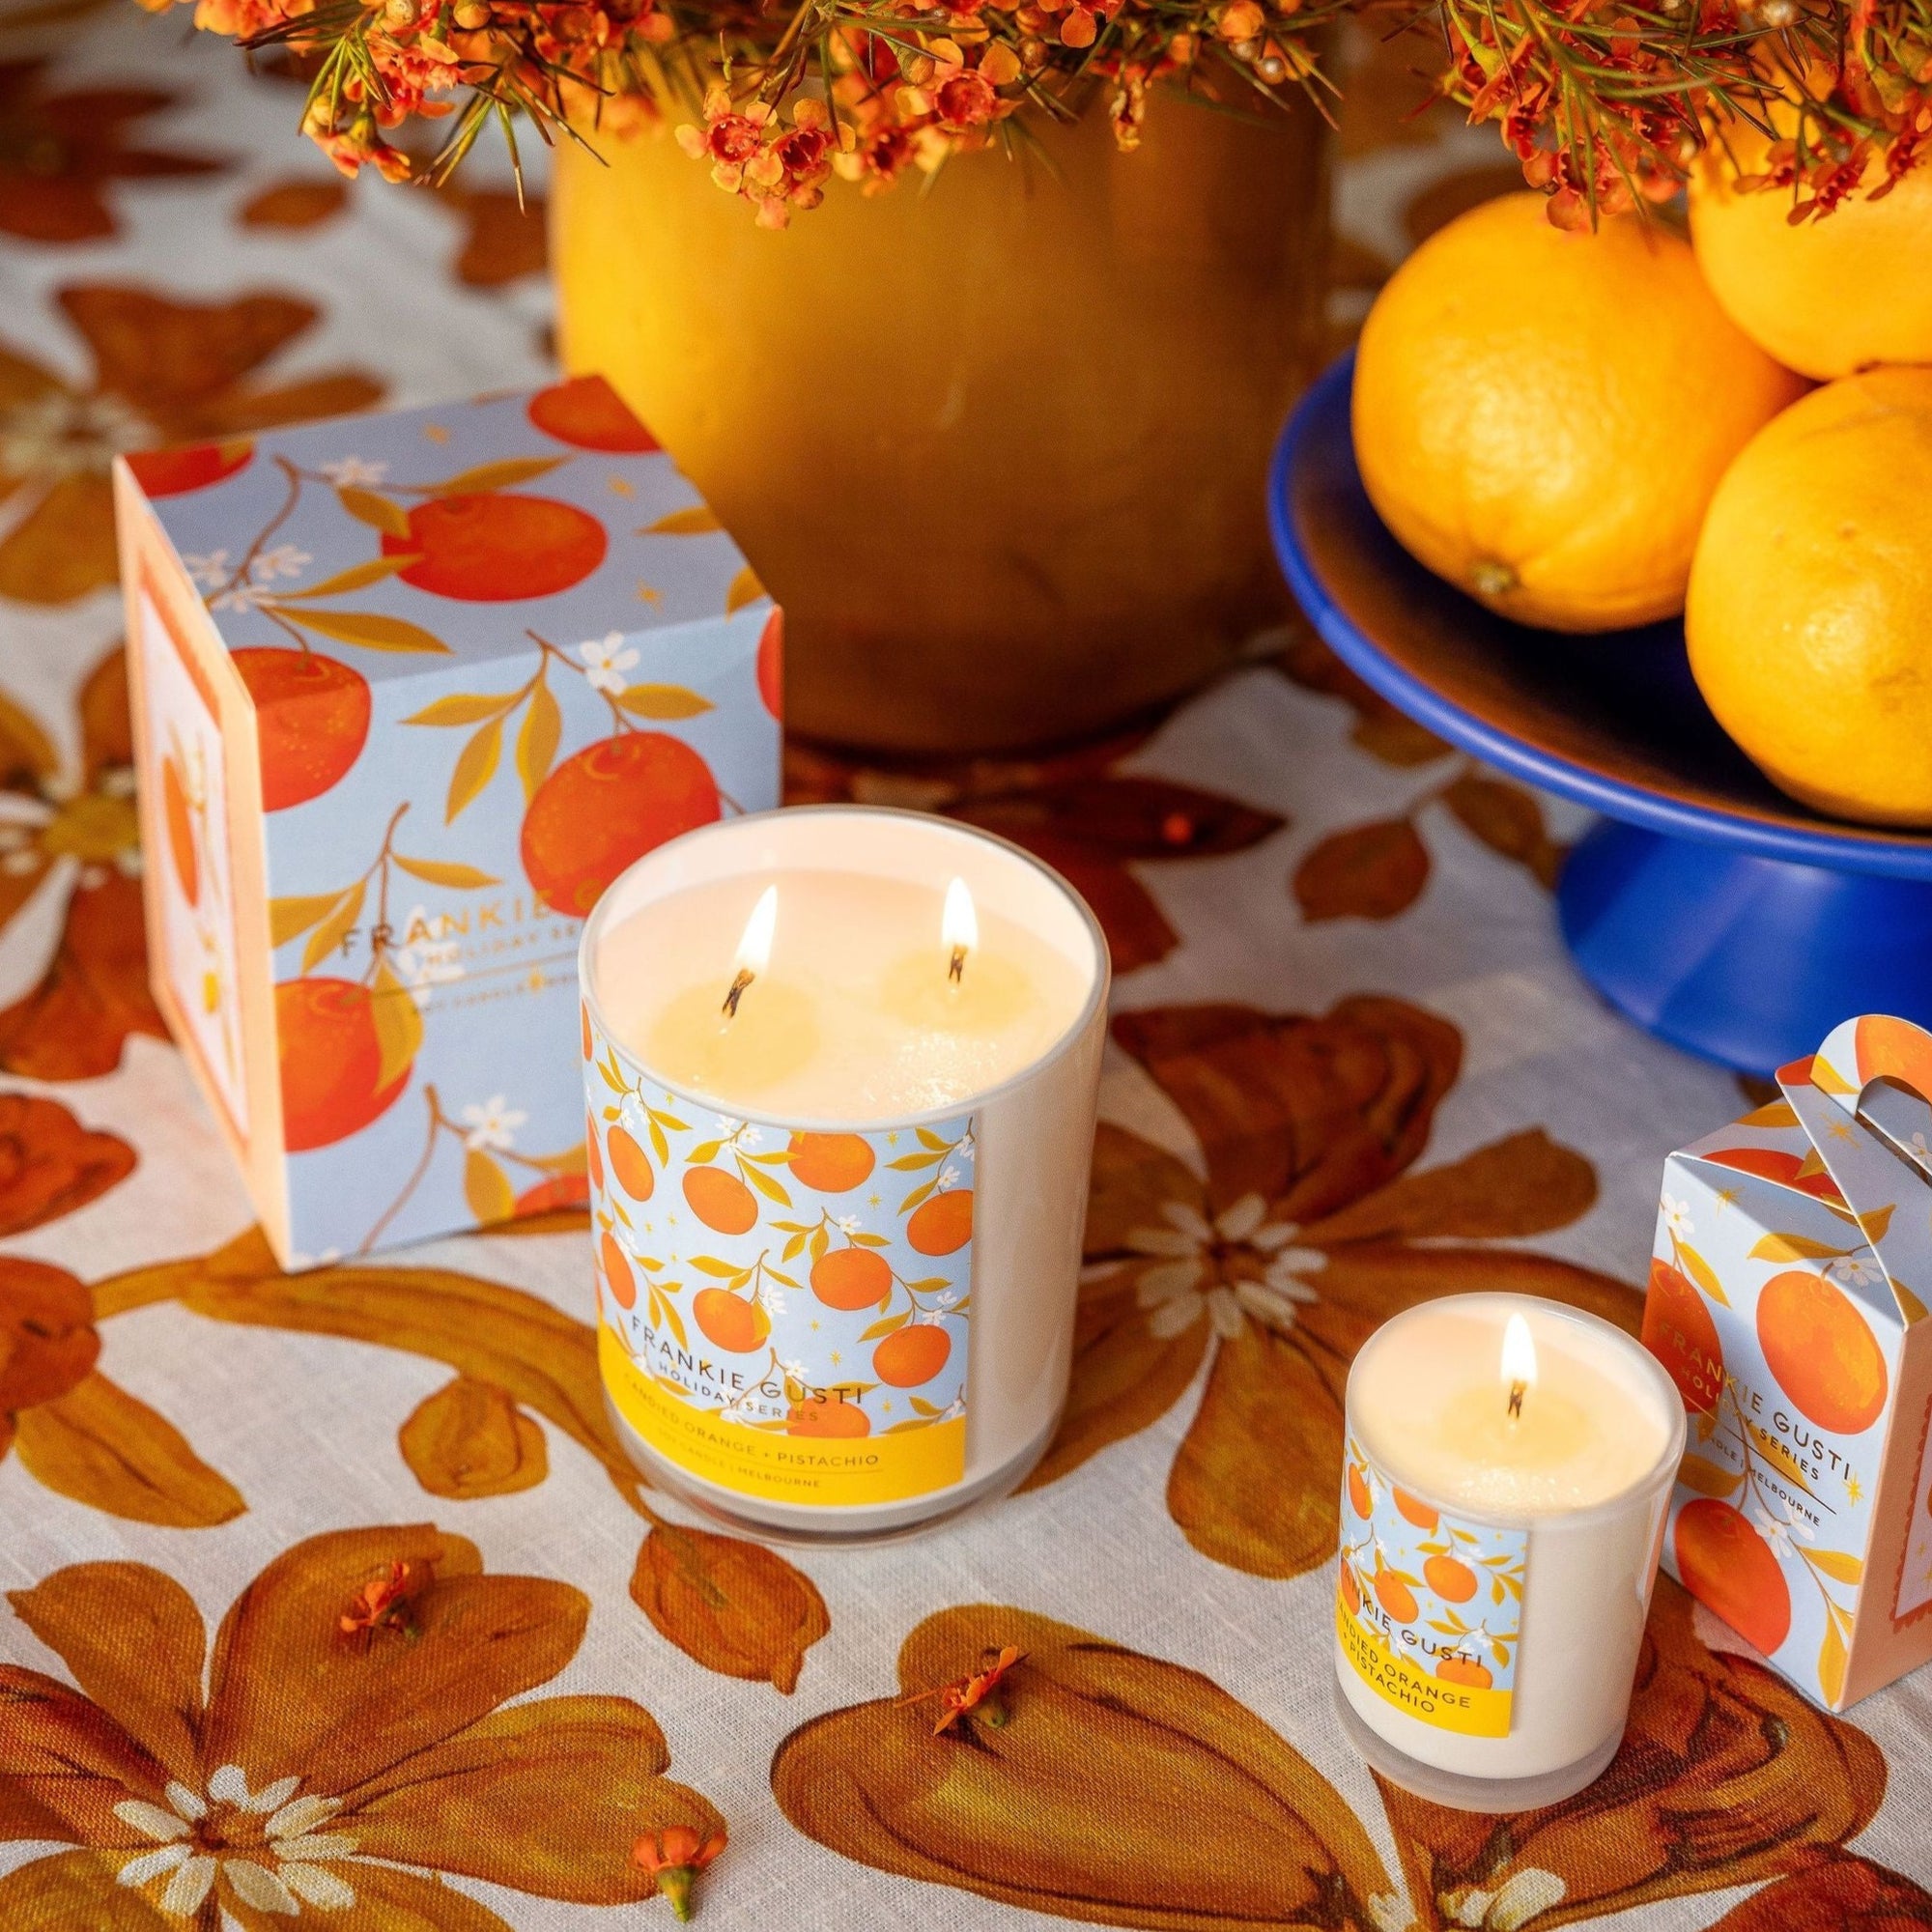 FRANKIE GUSTI HOLIDAY SERIES ORNAMENT CANDLE: CANDIED ORANGE + PISTACHIO